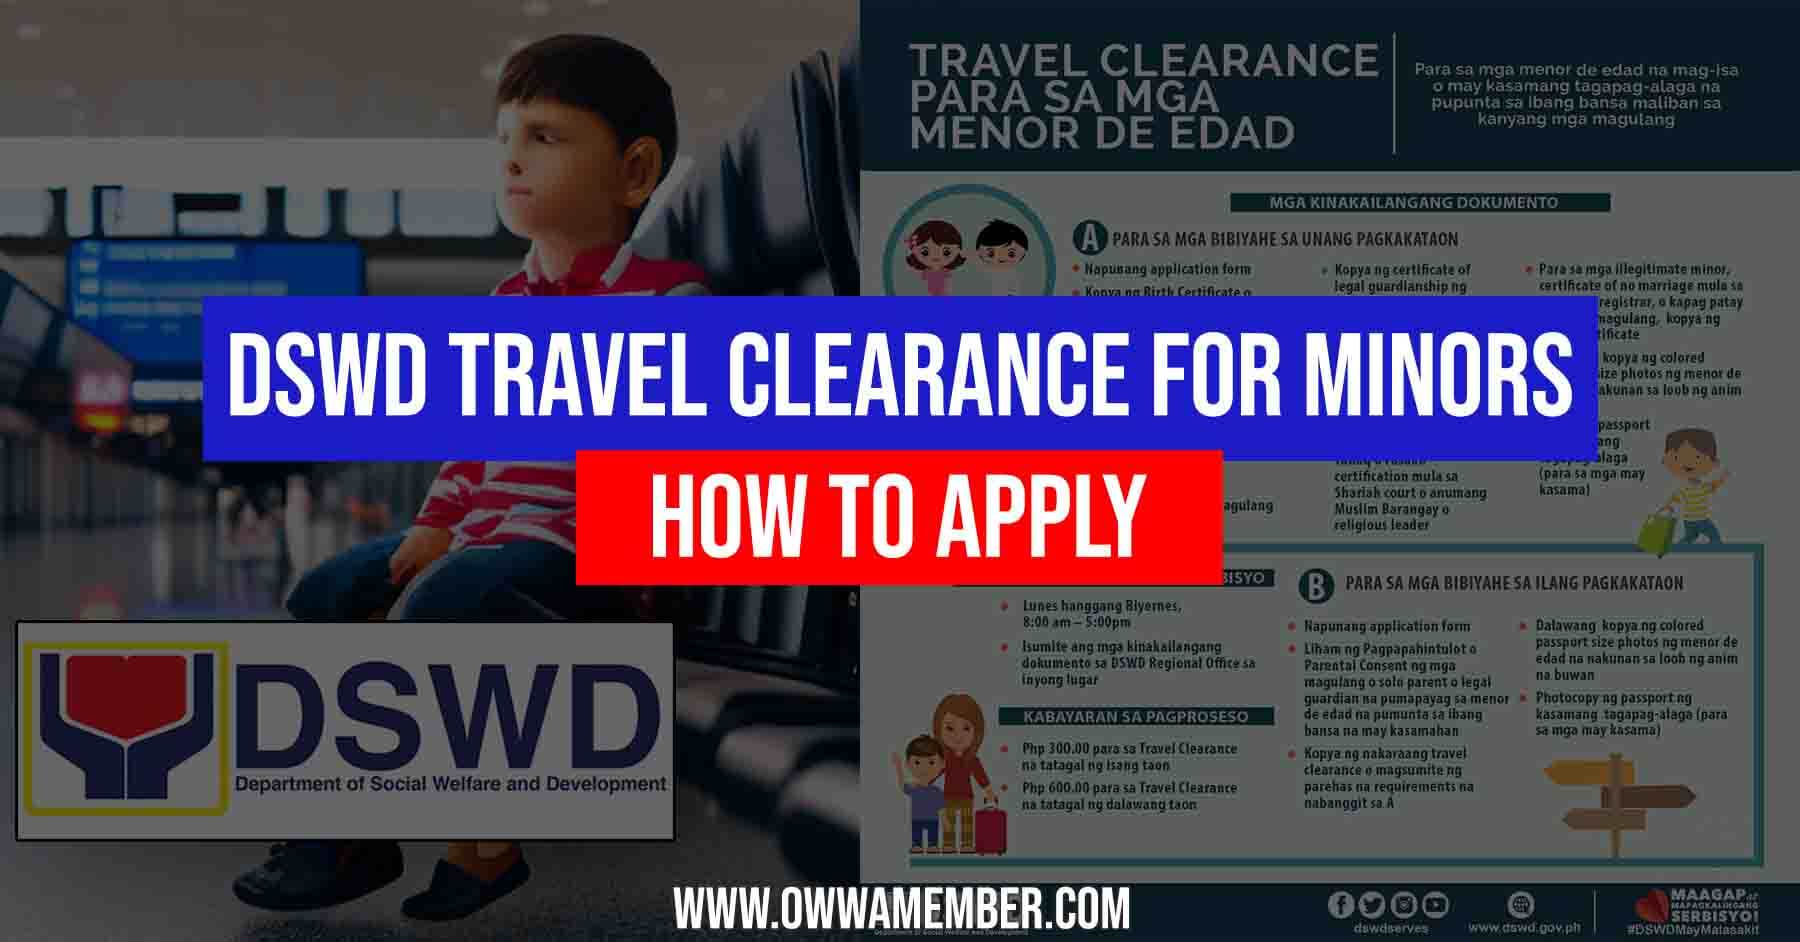 dswd travel clearance for minors application process